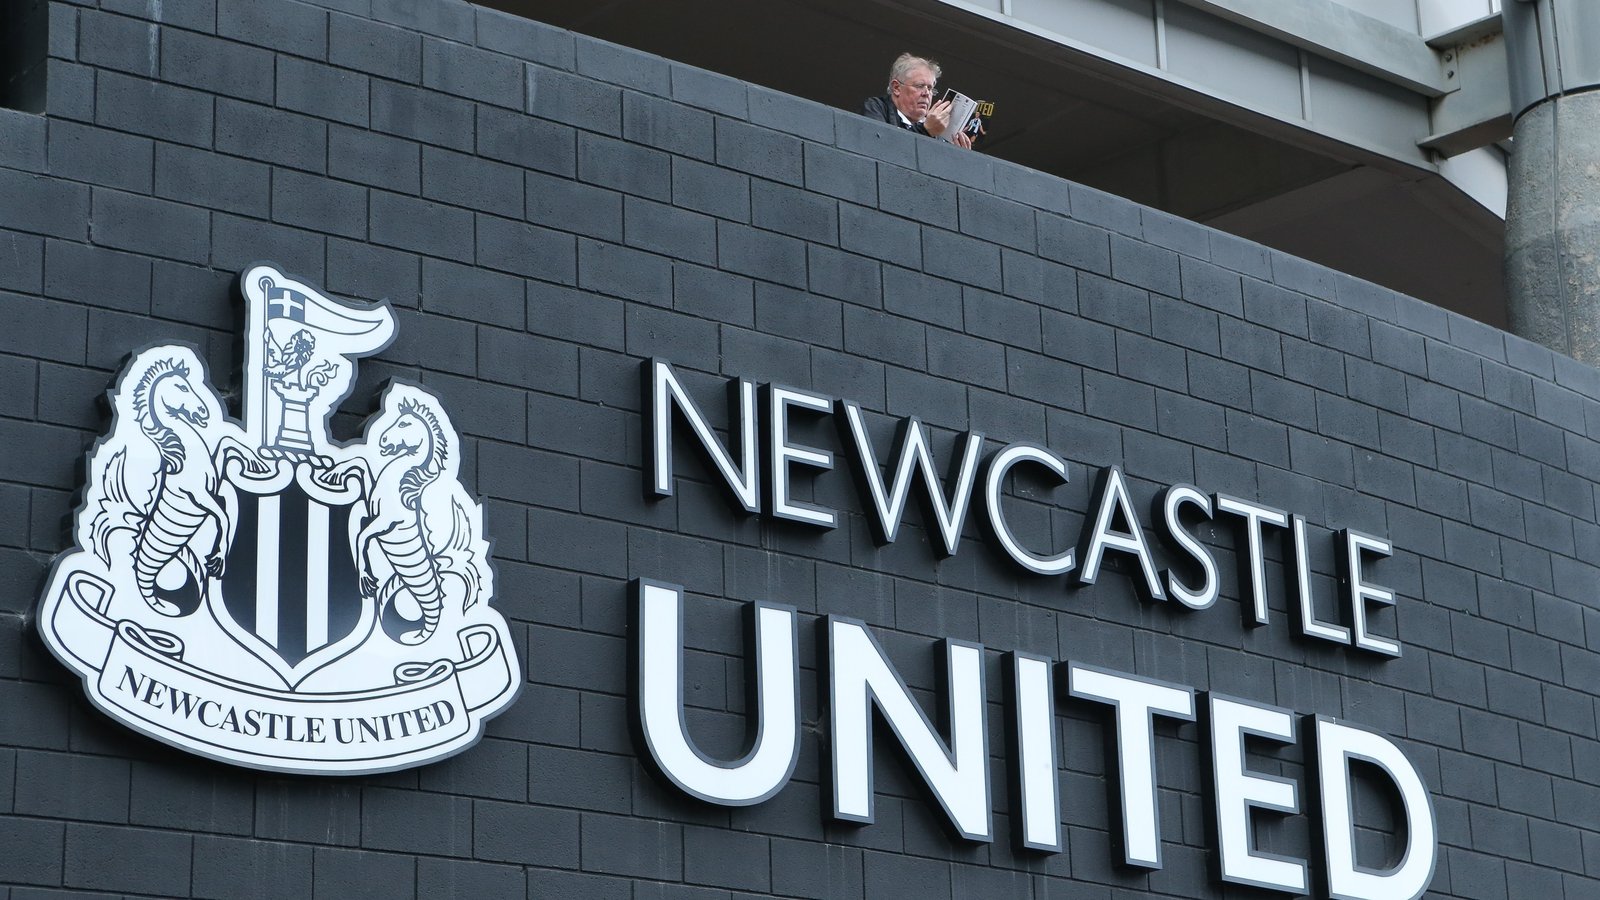 Image - The team was named after Newcastle United, also known as the Magpies